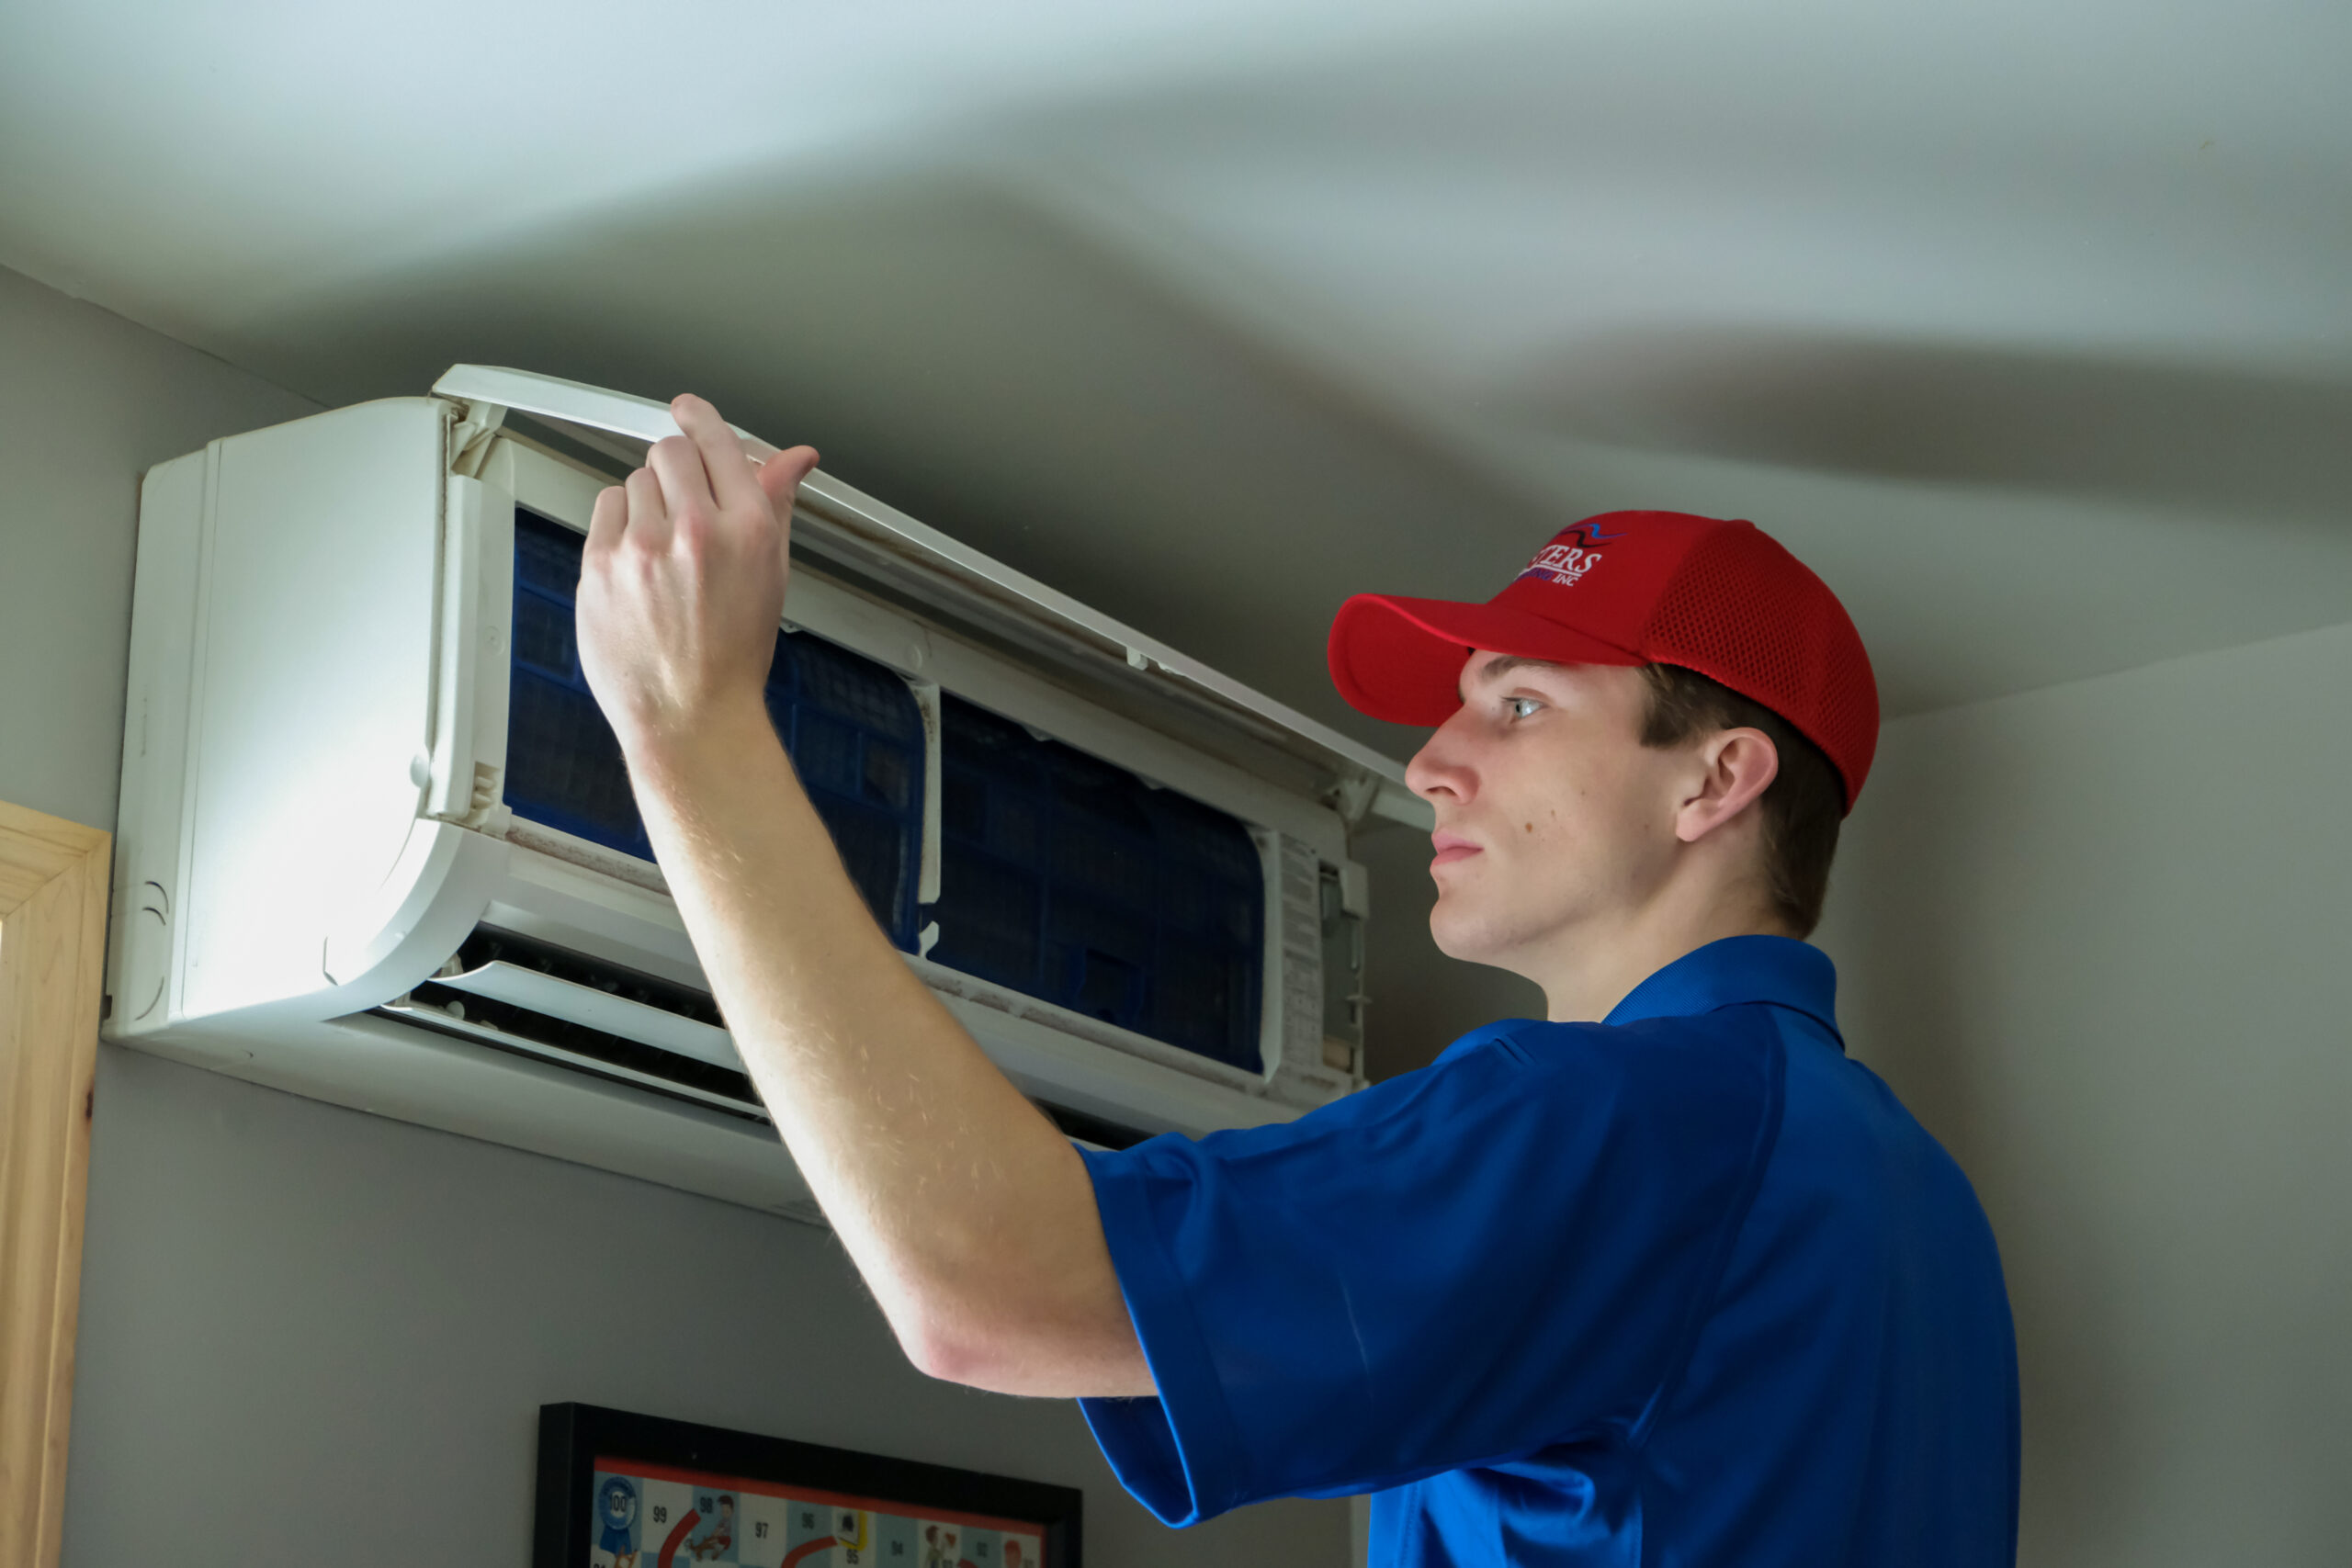 Masters technician repairing a ductless HVAC unit